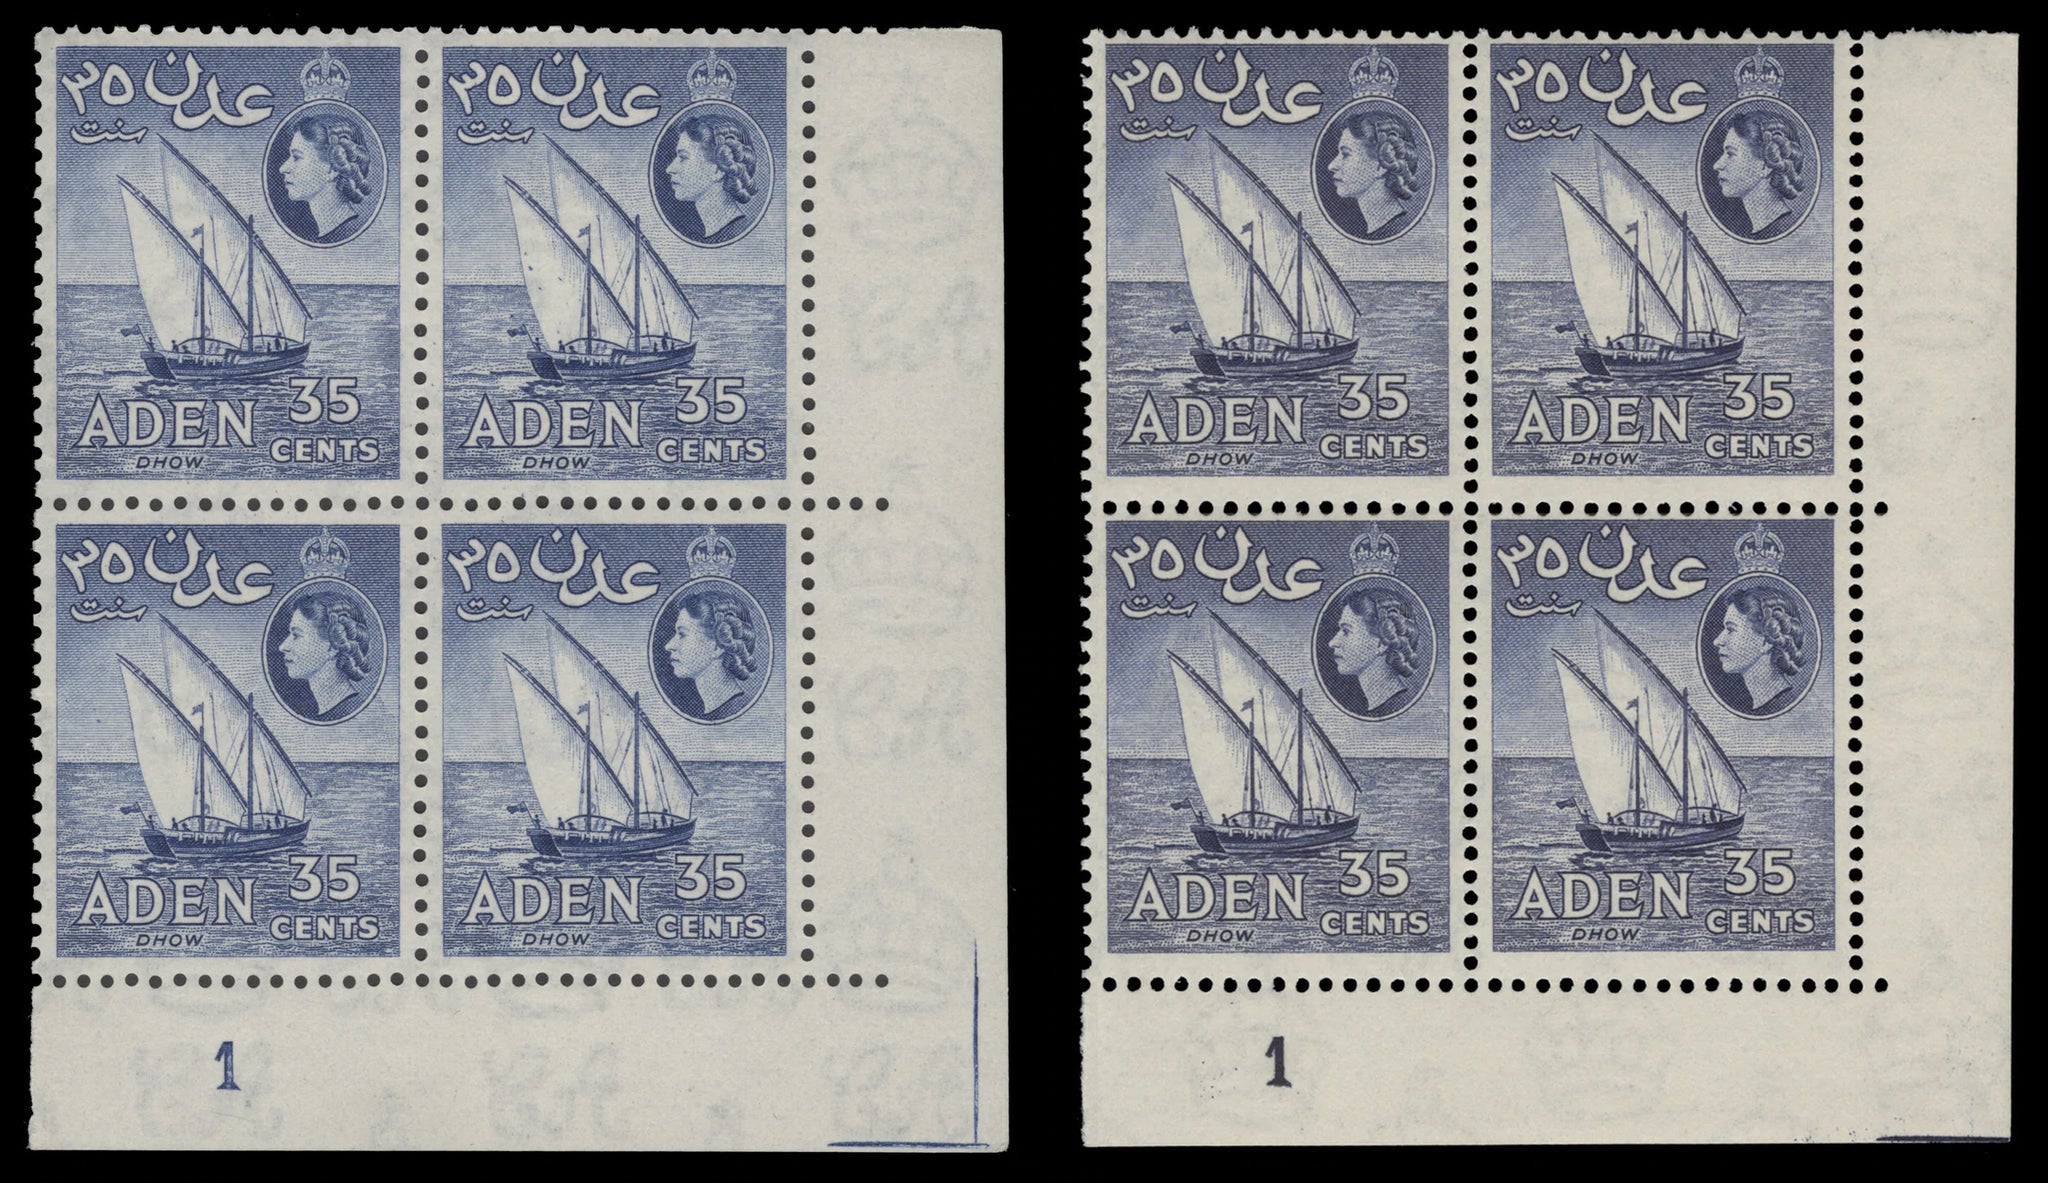 35c Dhow plate 1 blocks perf 12 x 12 and 12 x 13½ respectively